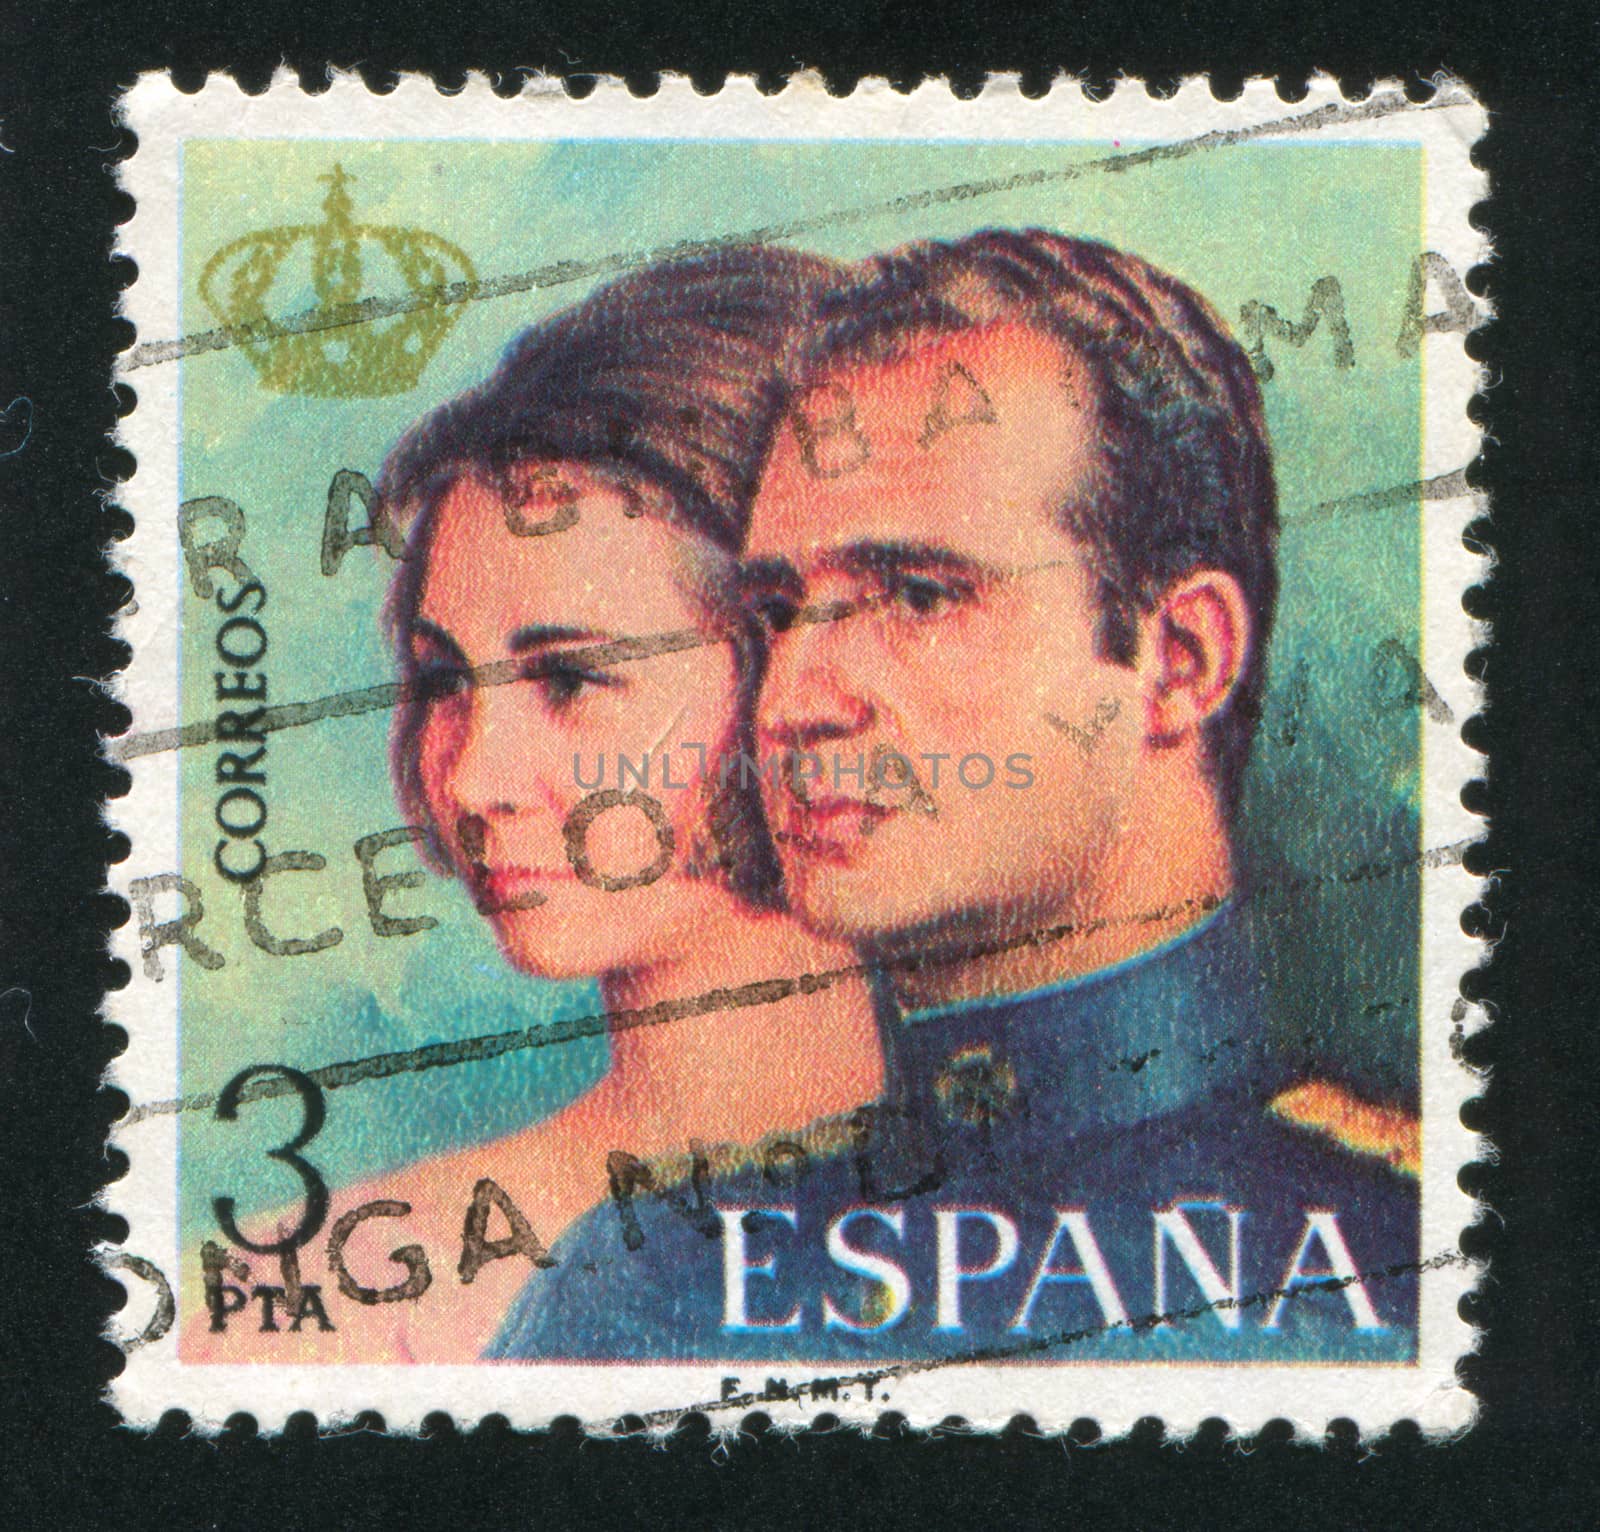 Qween Sofia and King Juan Carlos I by rook